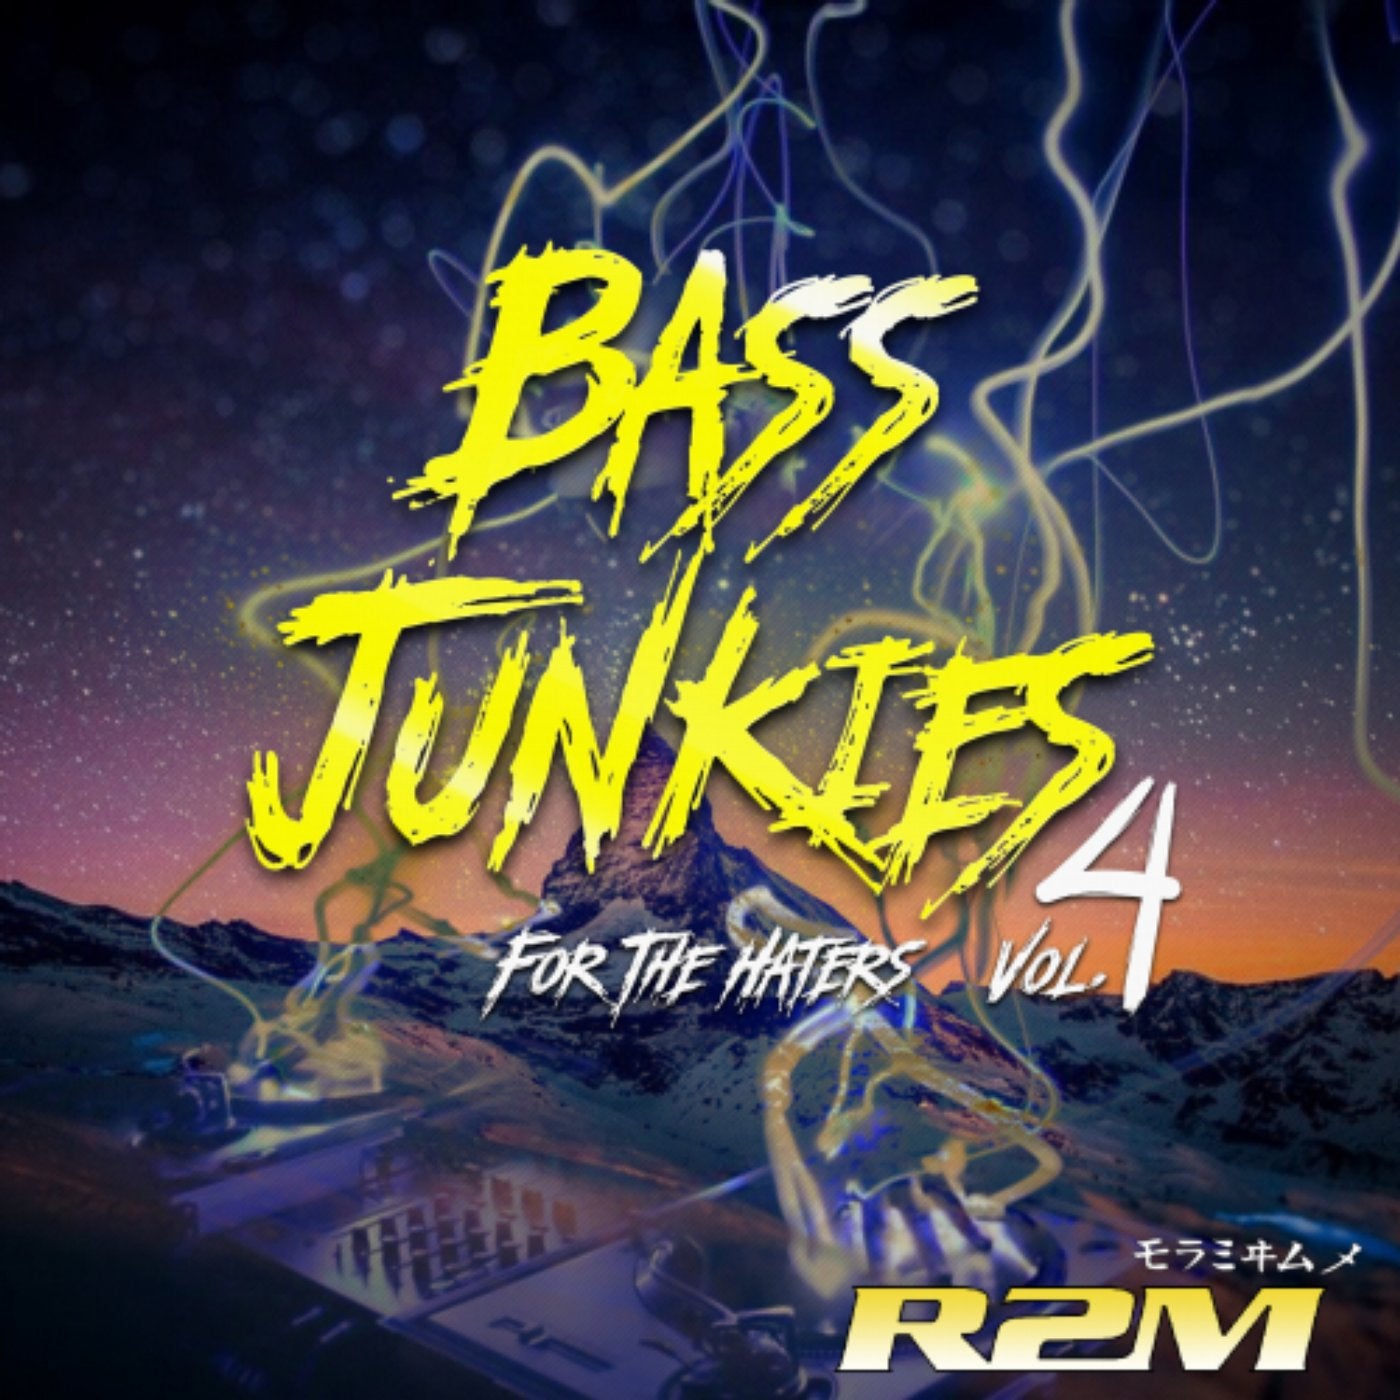 Bass Junkies, Vol. 4 "For The Haters"